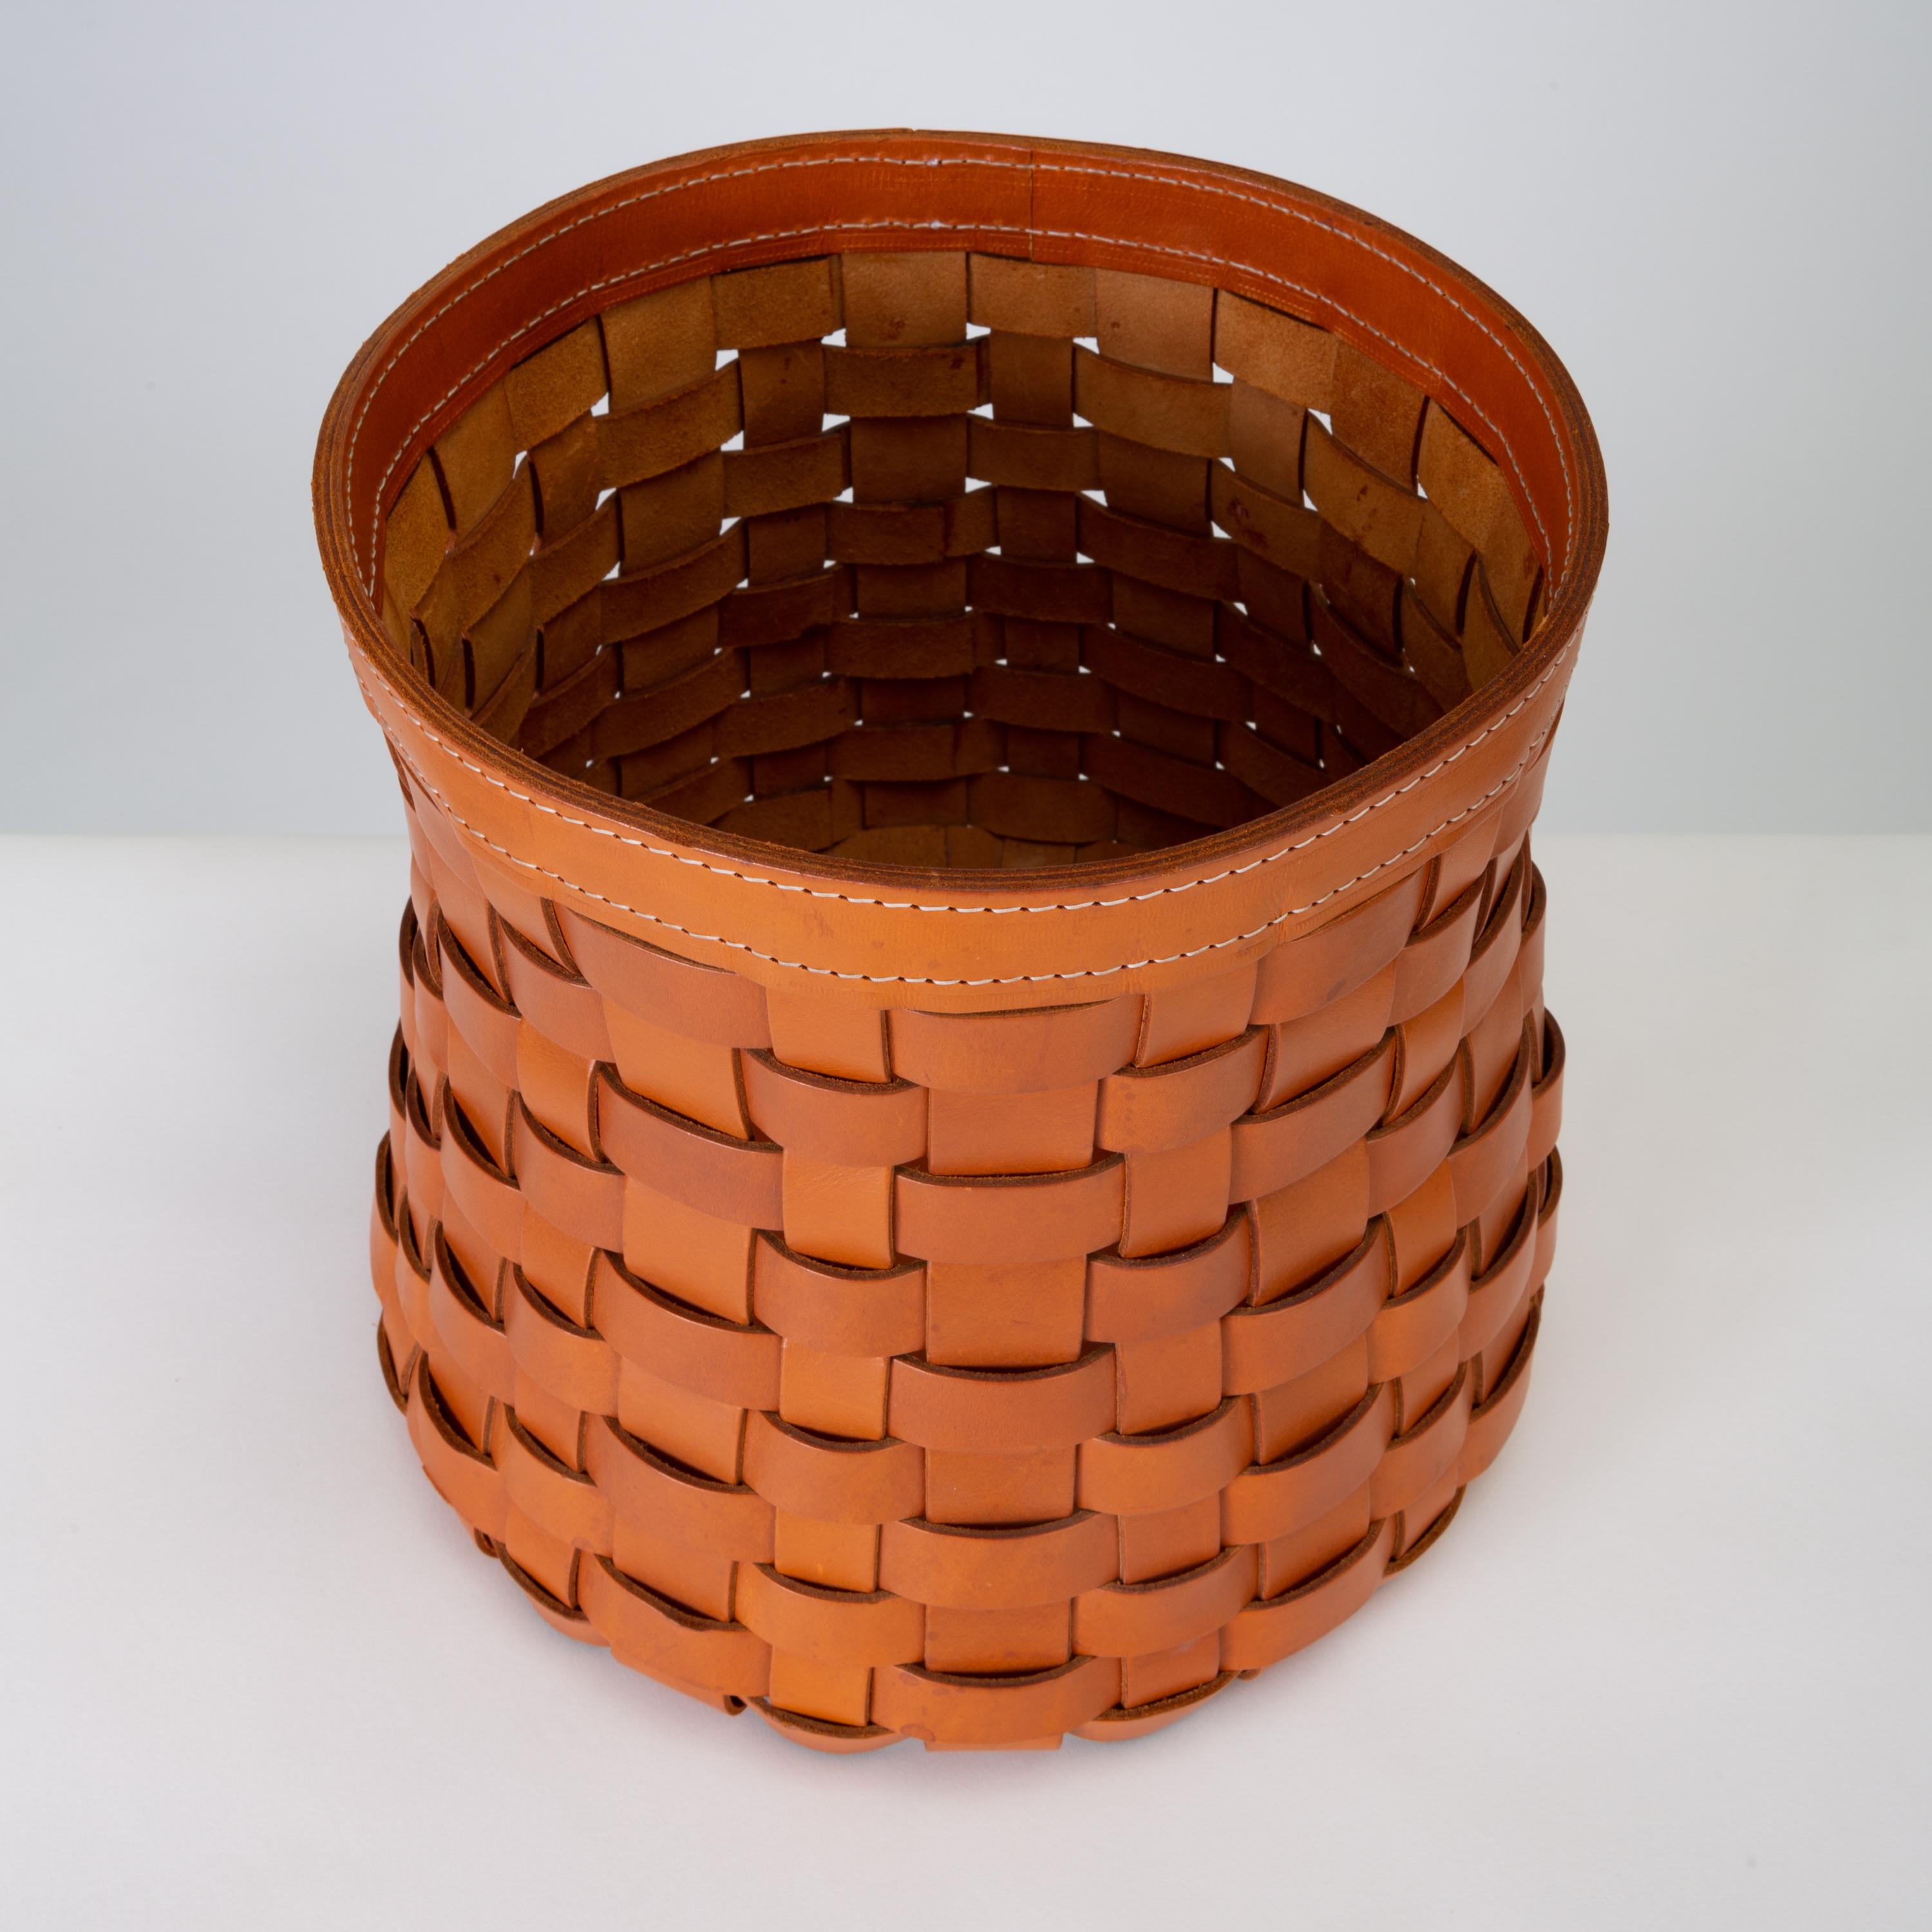 Modern “Intrecci” Round Basket in Woven Leather by Arte Cuoio & Triangolo